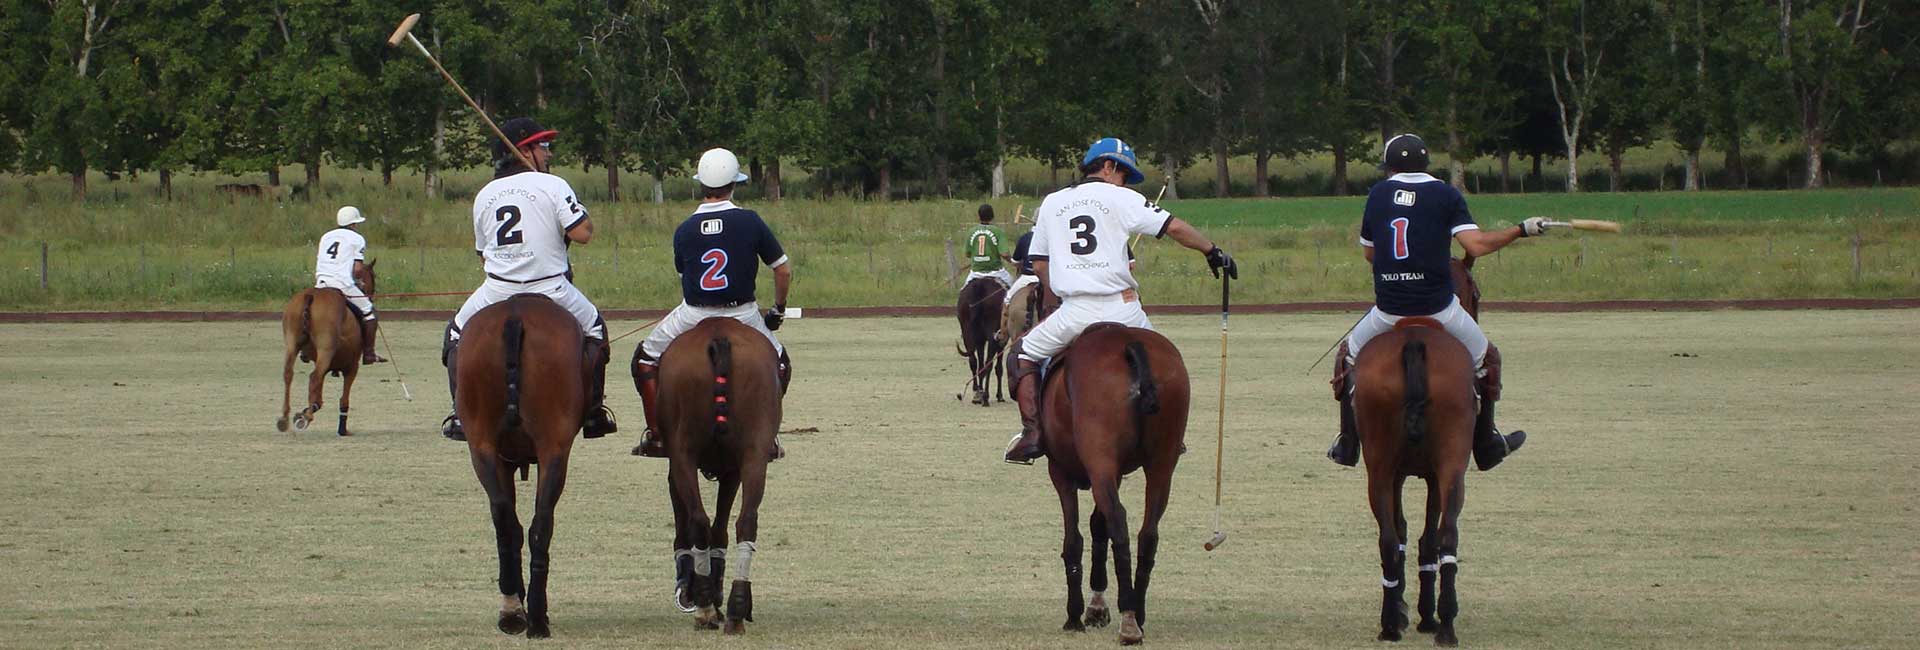 Learn Spanish and play Polo